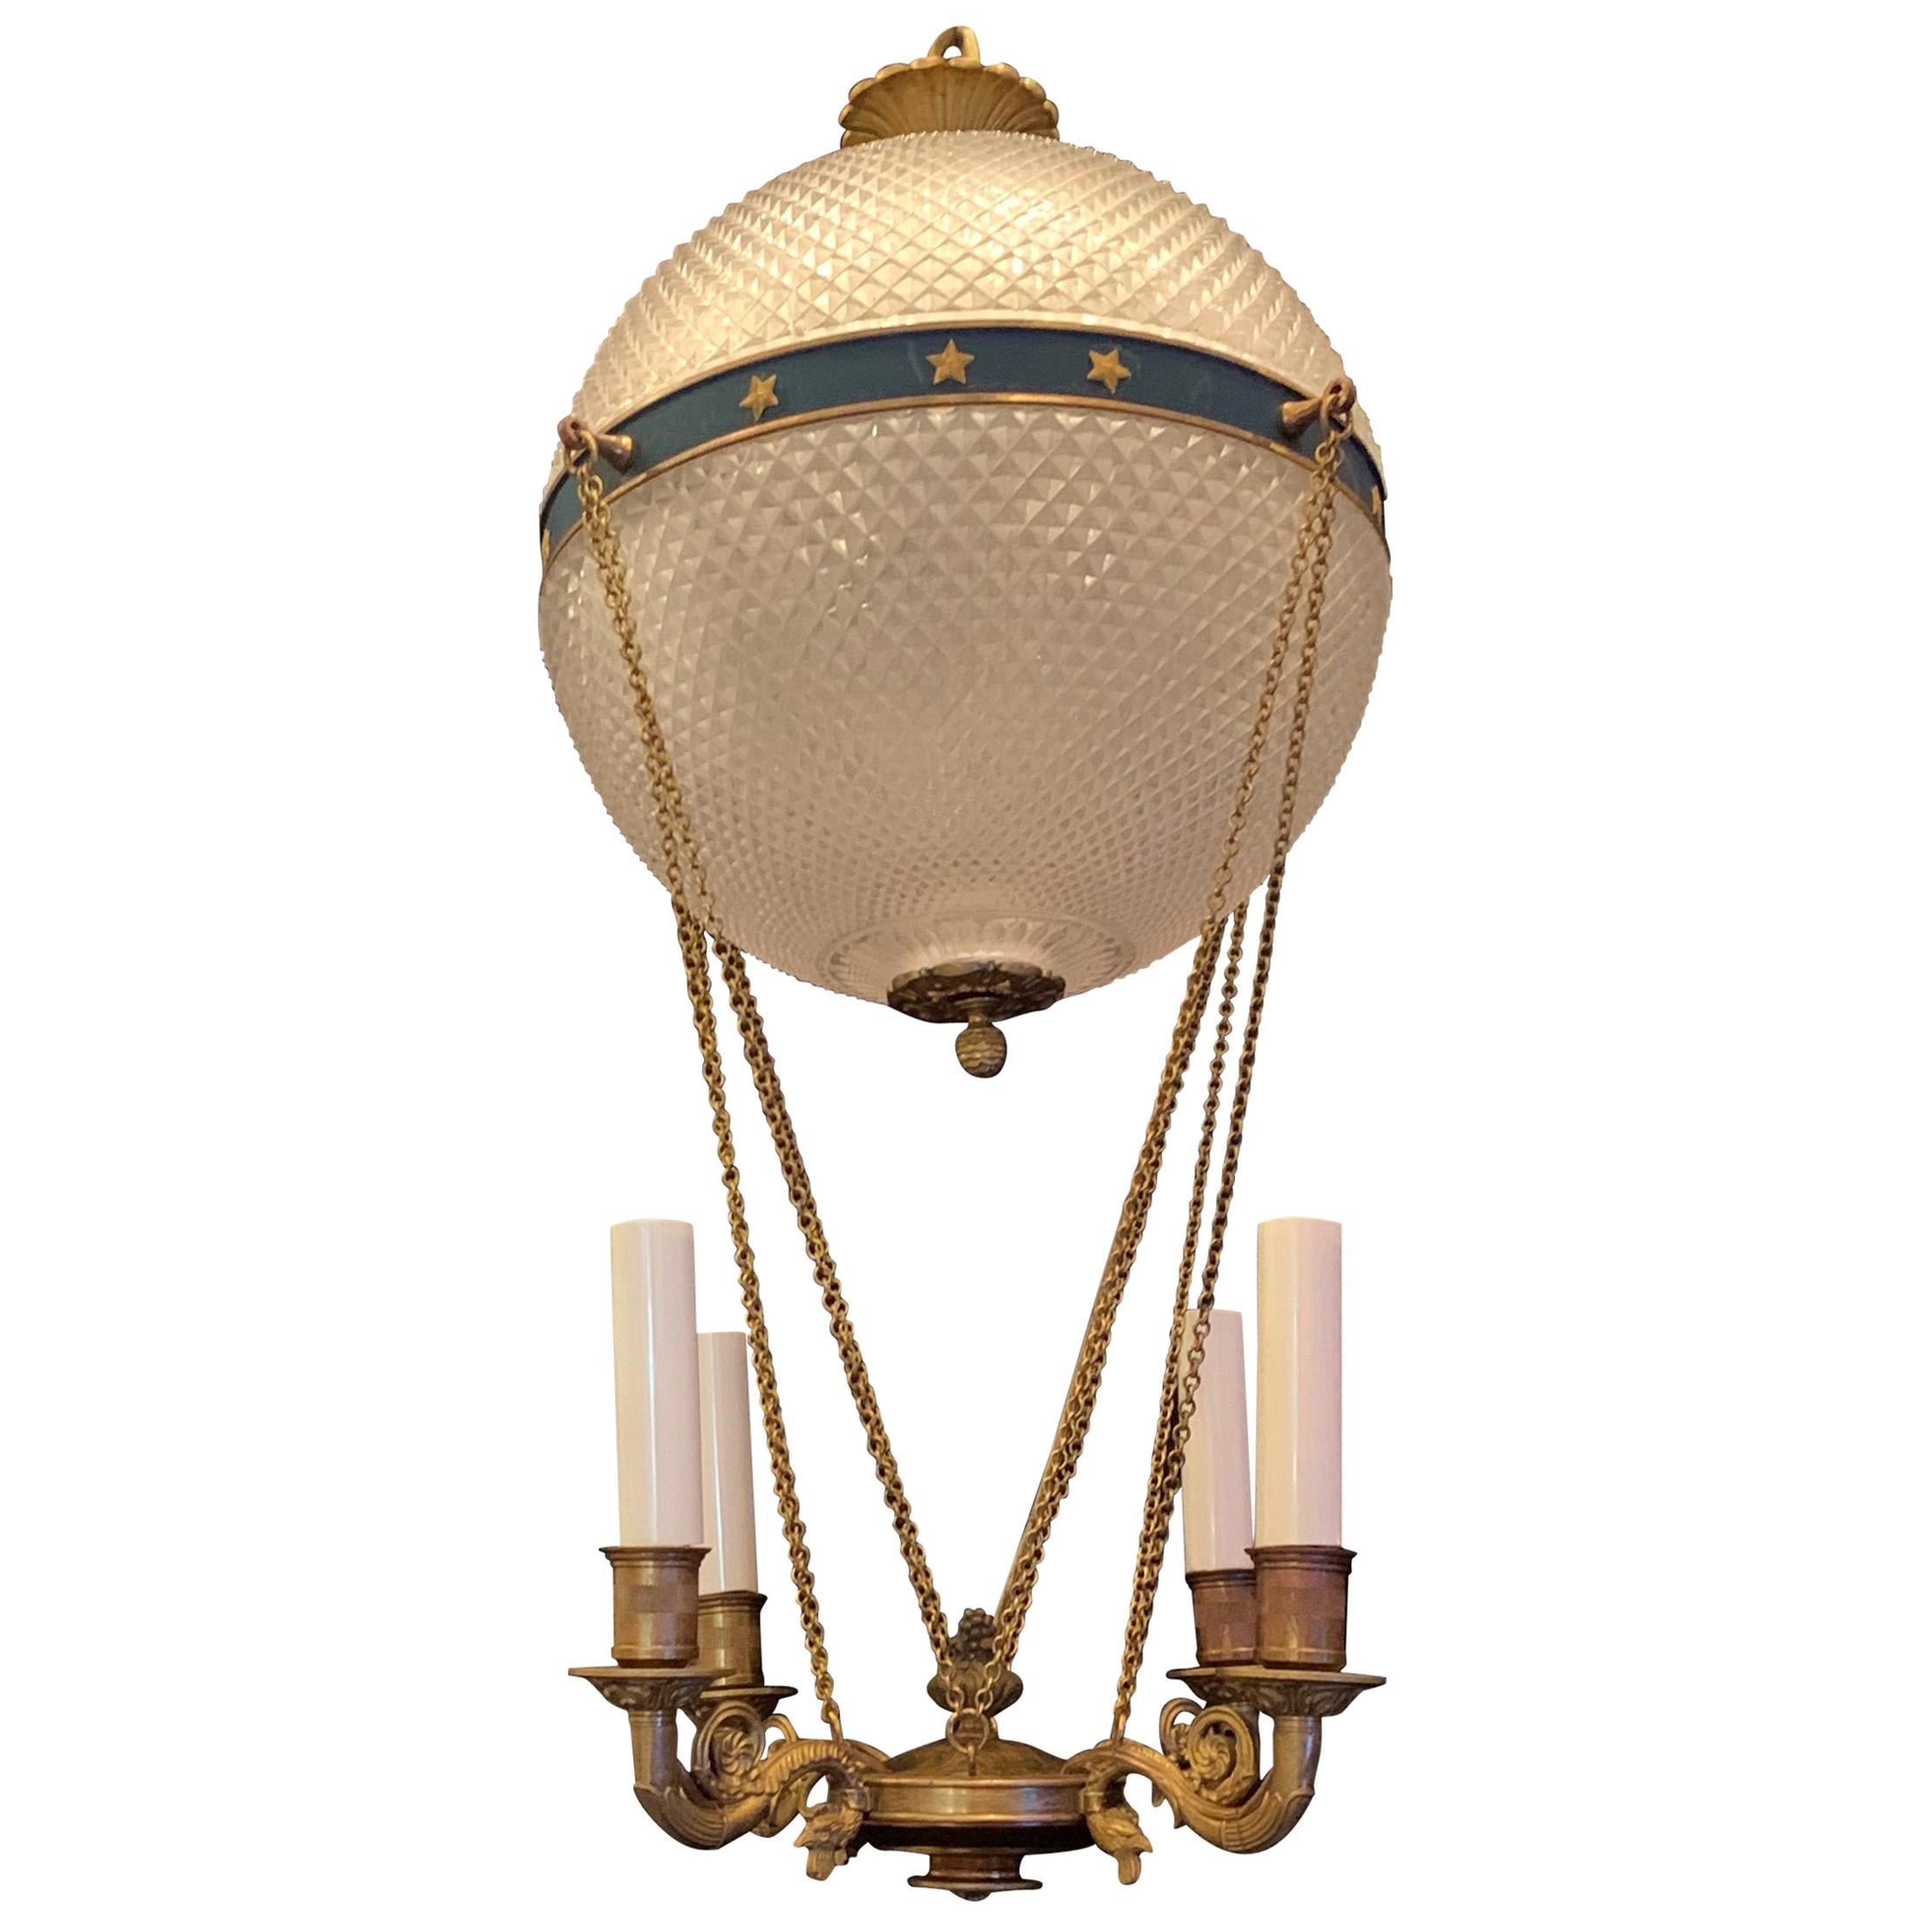 Wonderful French Neoclassical Bronze Crystal Hot Air Balloon Fixture Chandelier